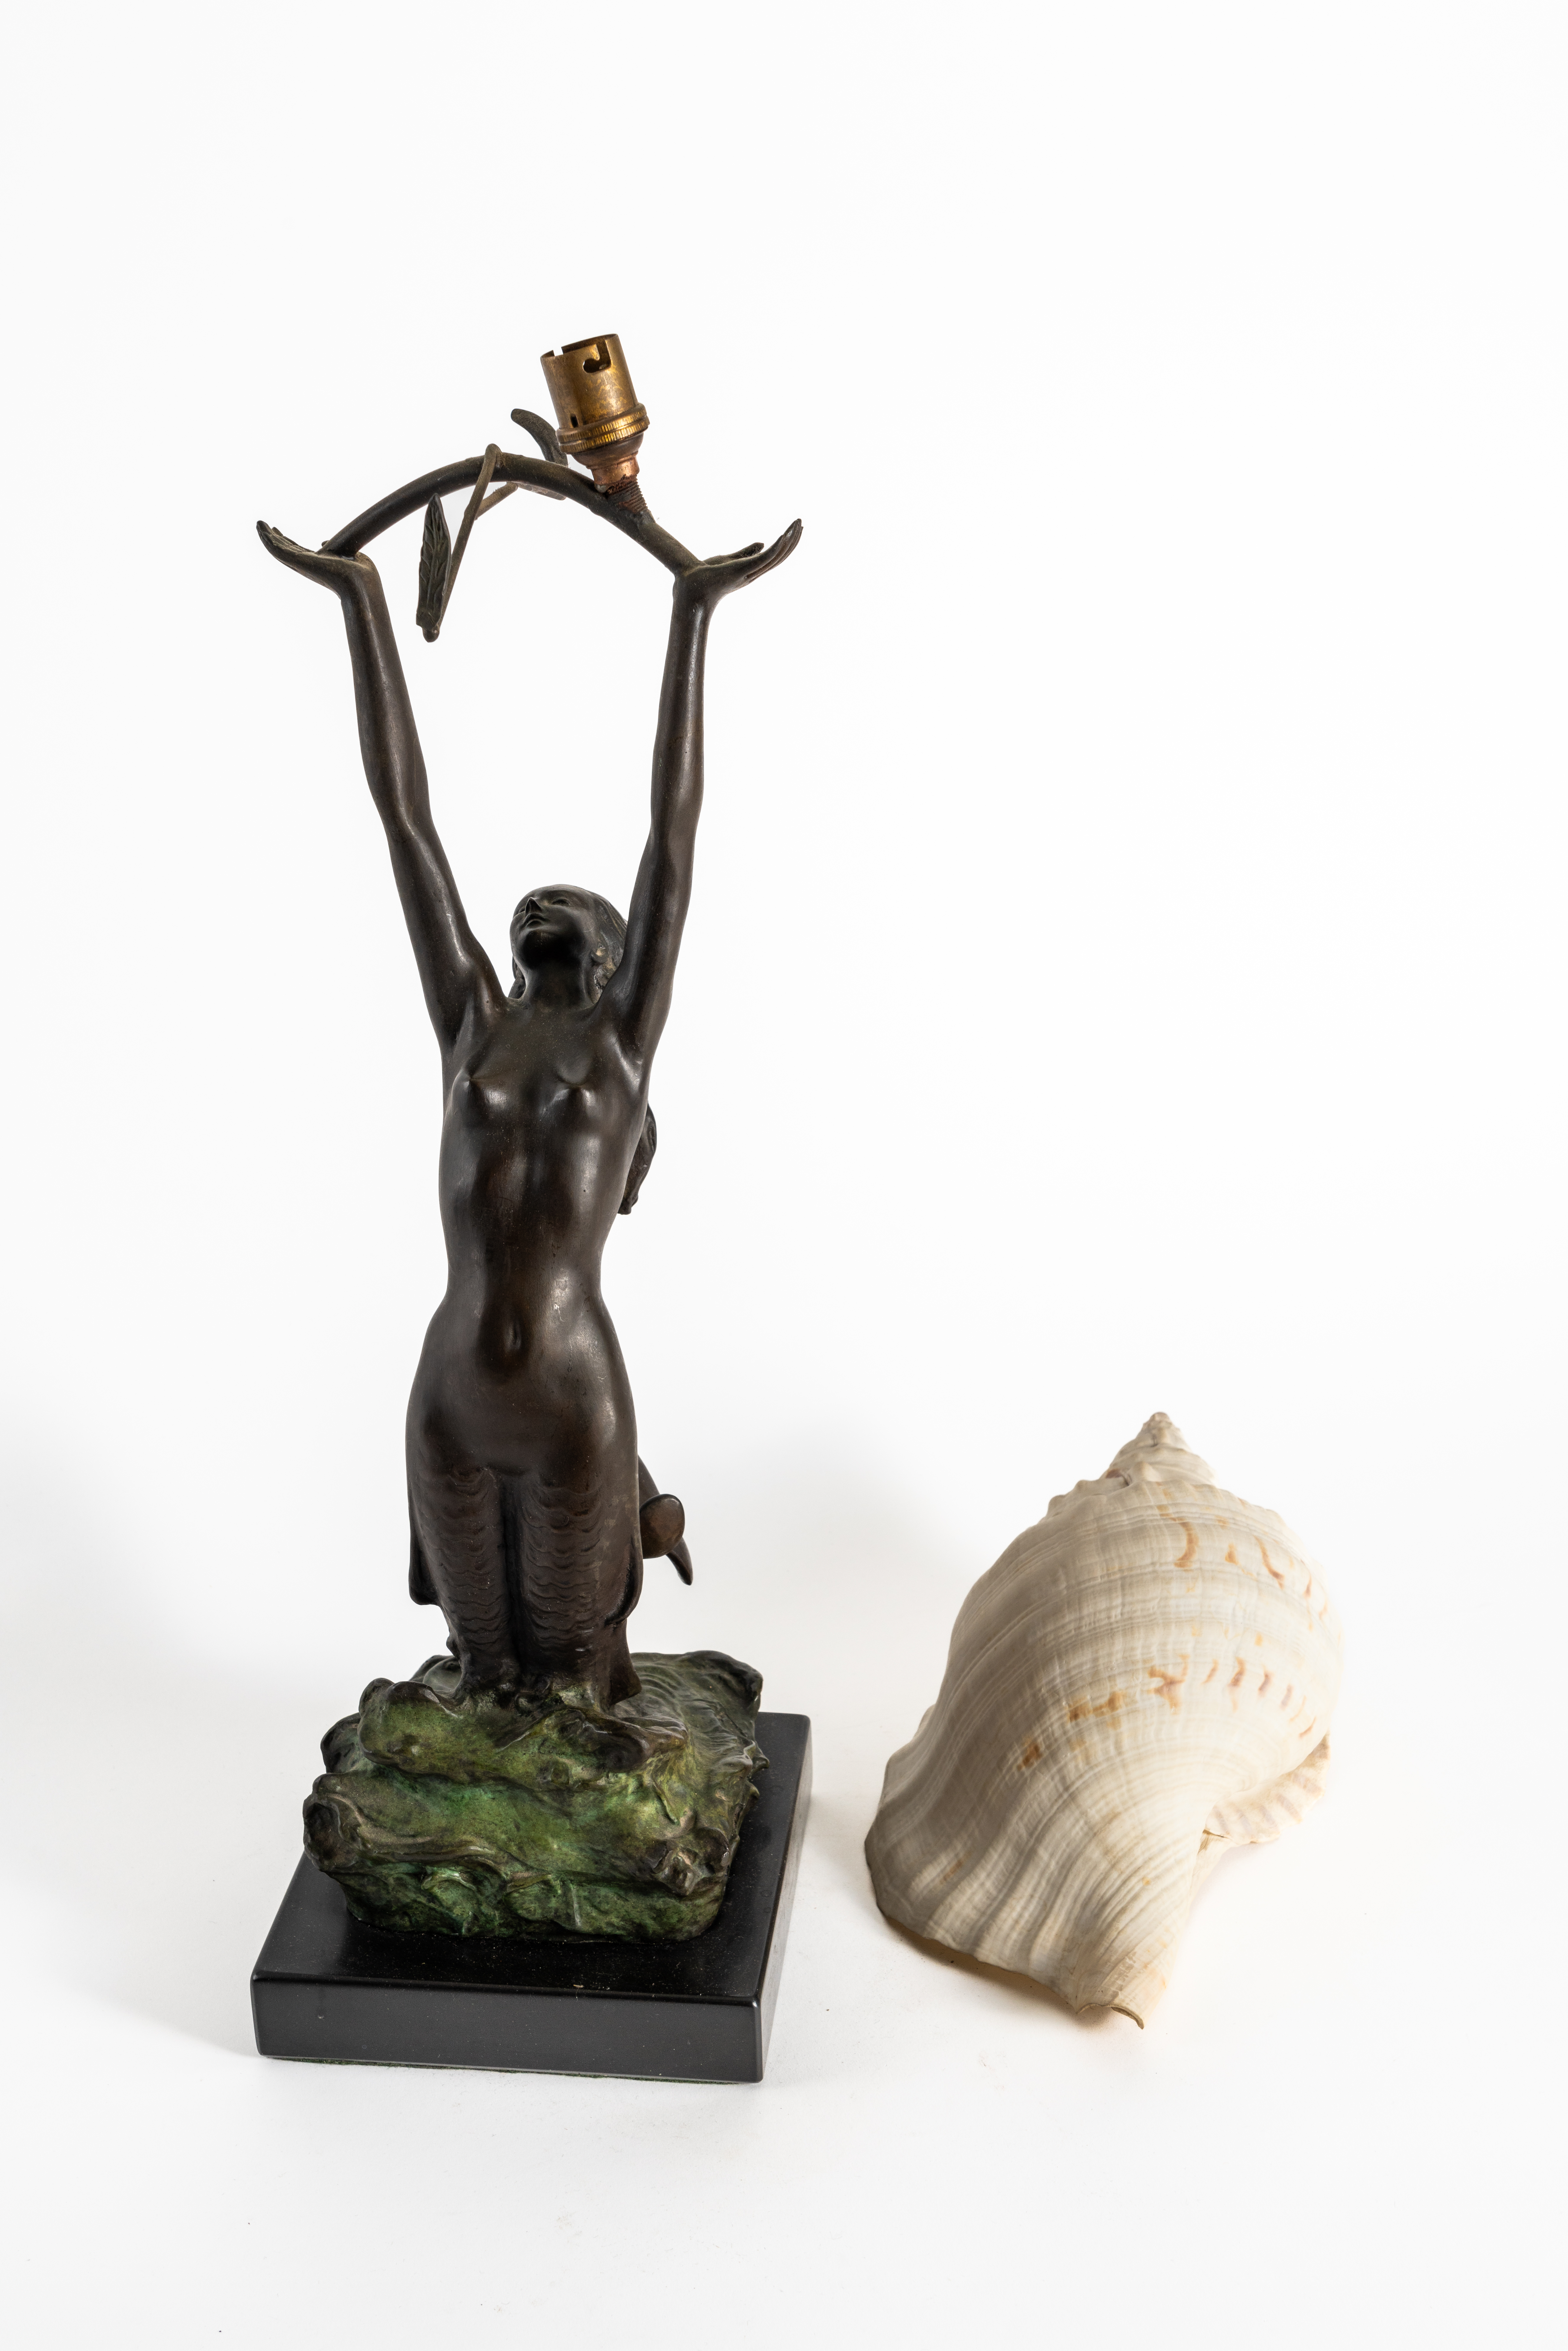 A FRENCH ART NOUVEAU BRONZE MERMAID FIGURAL TABLE LAMP - Image 9 of 9